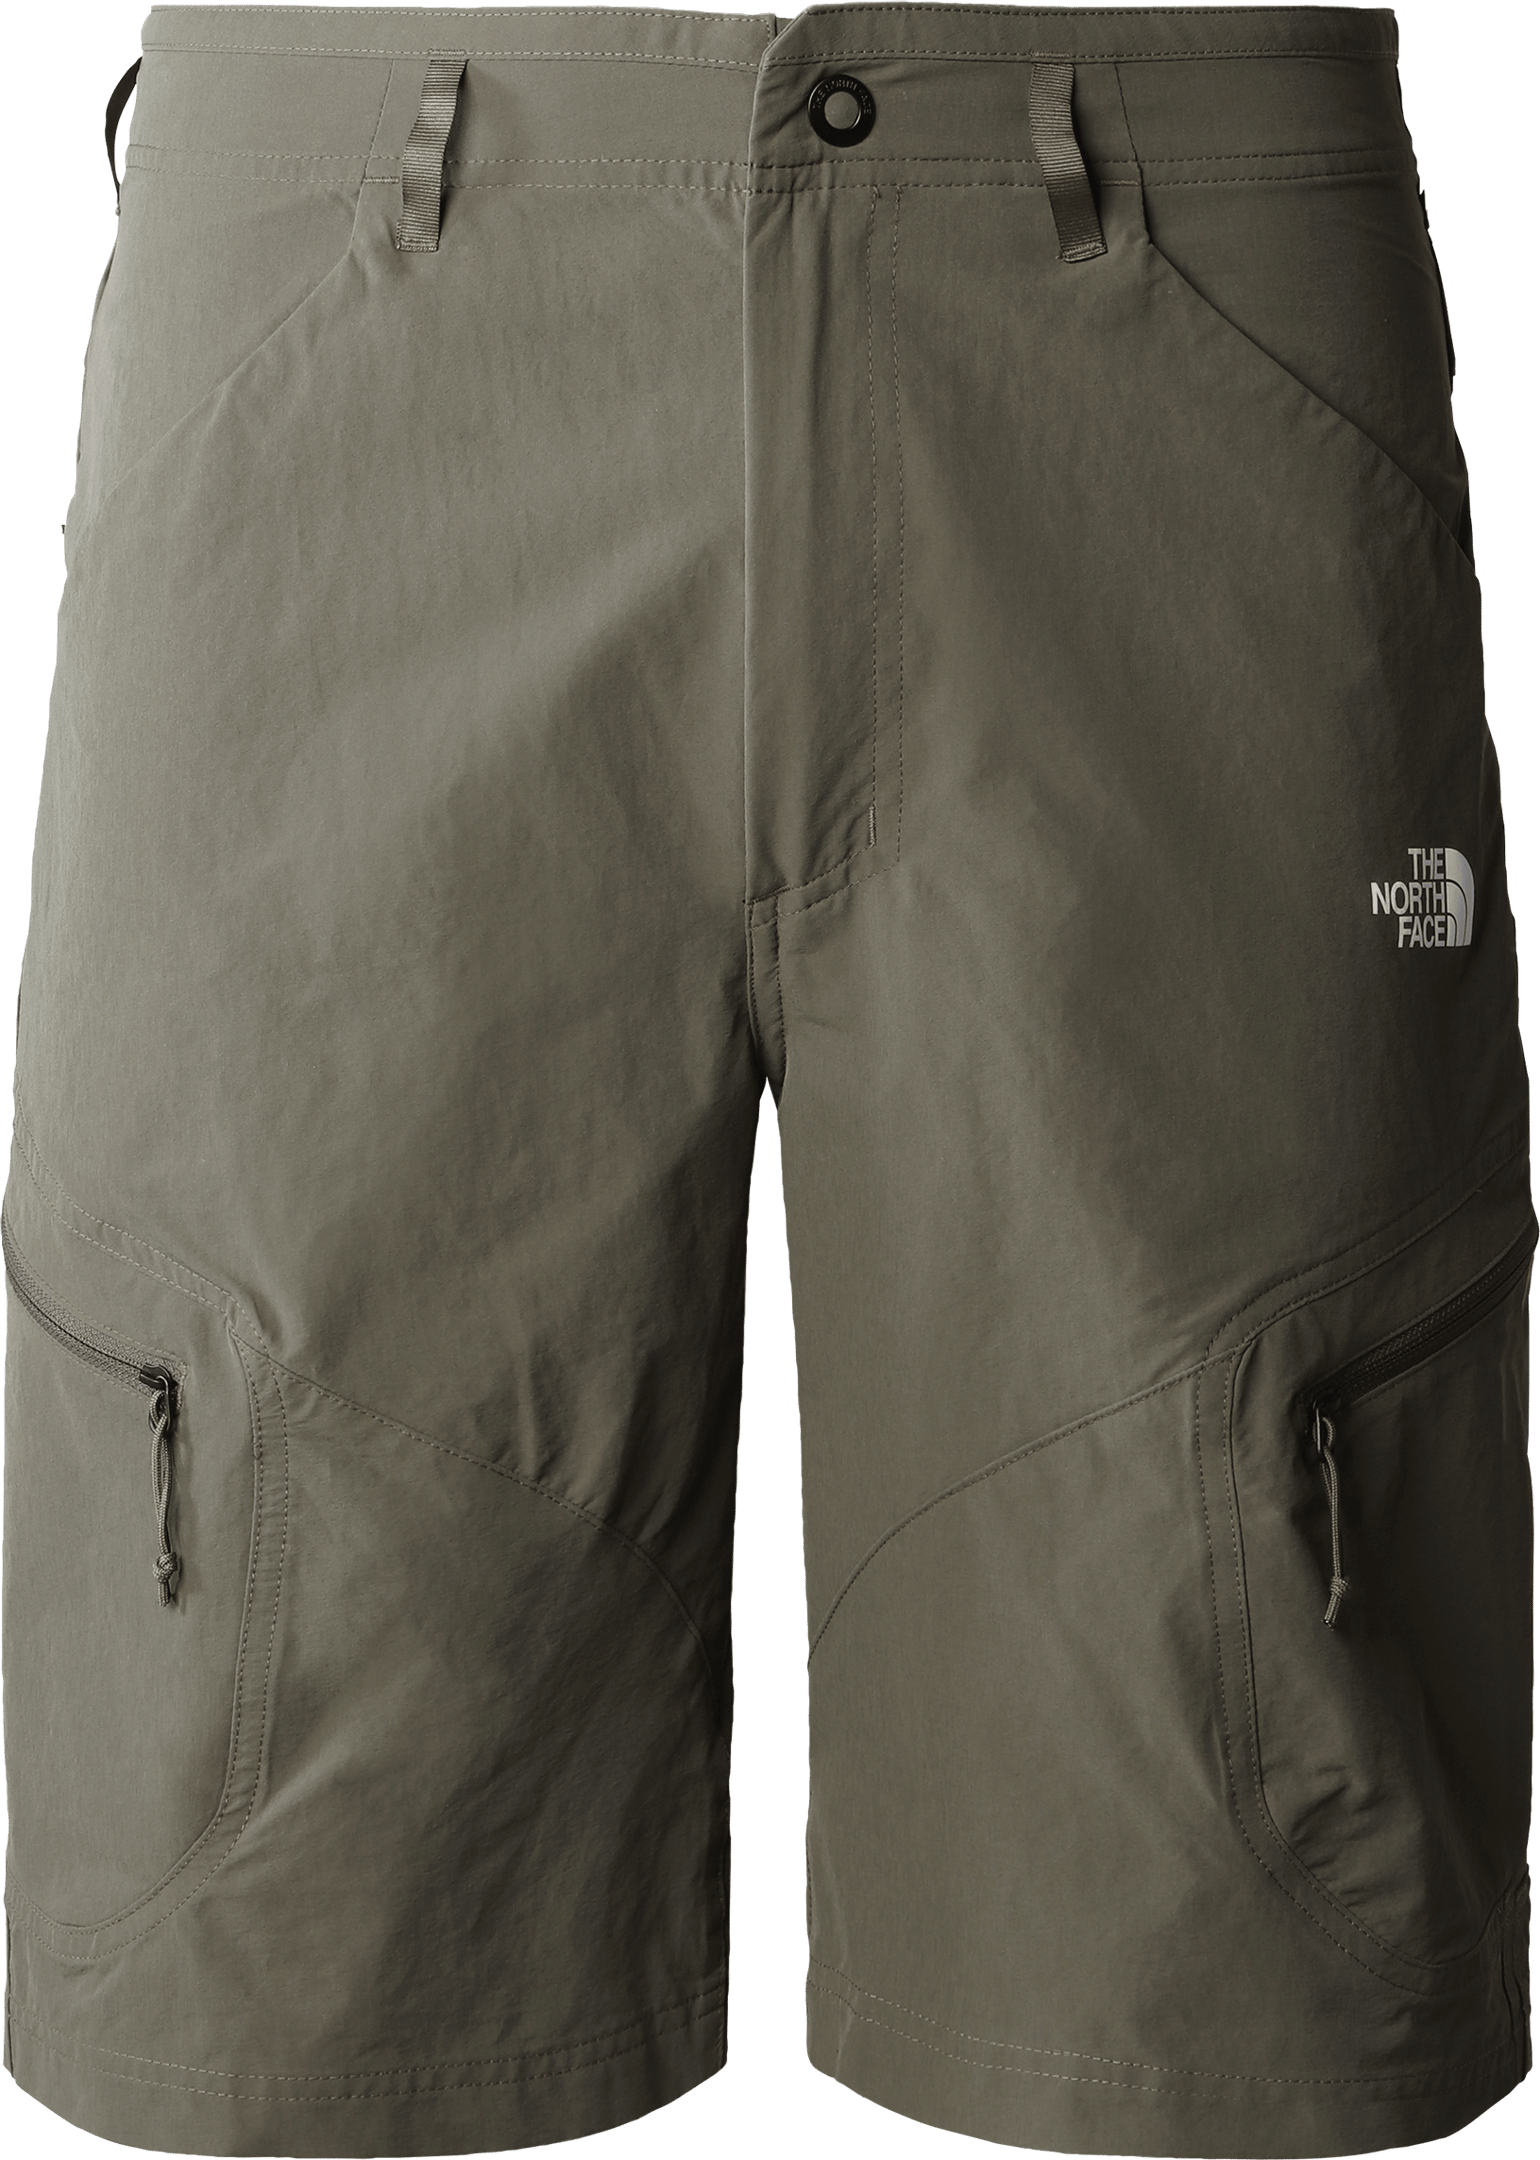 Men's Exploration Shorts NEW TAUPE GREEN